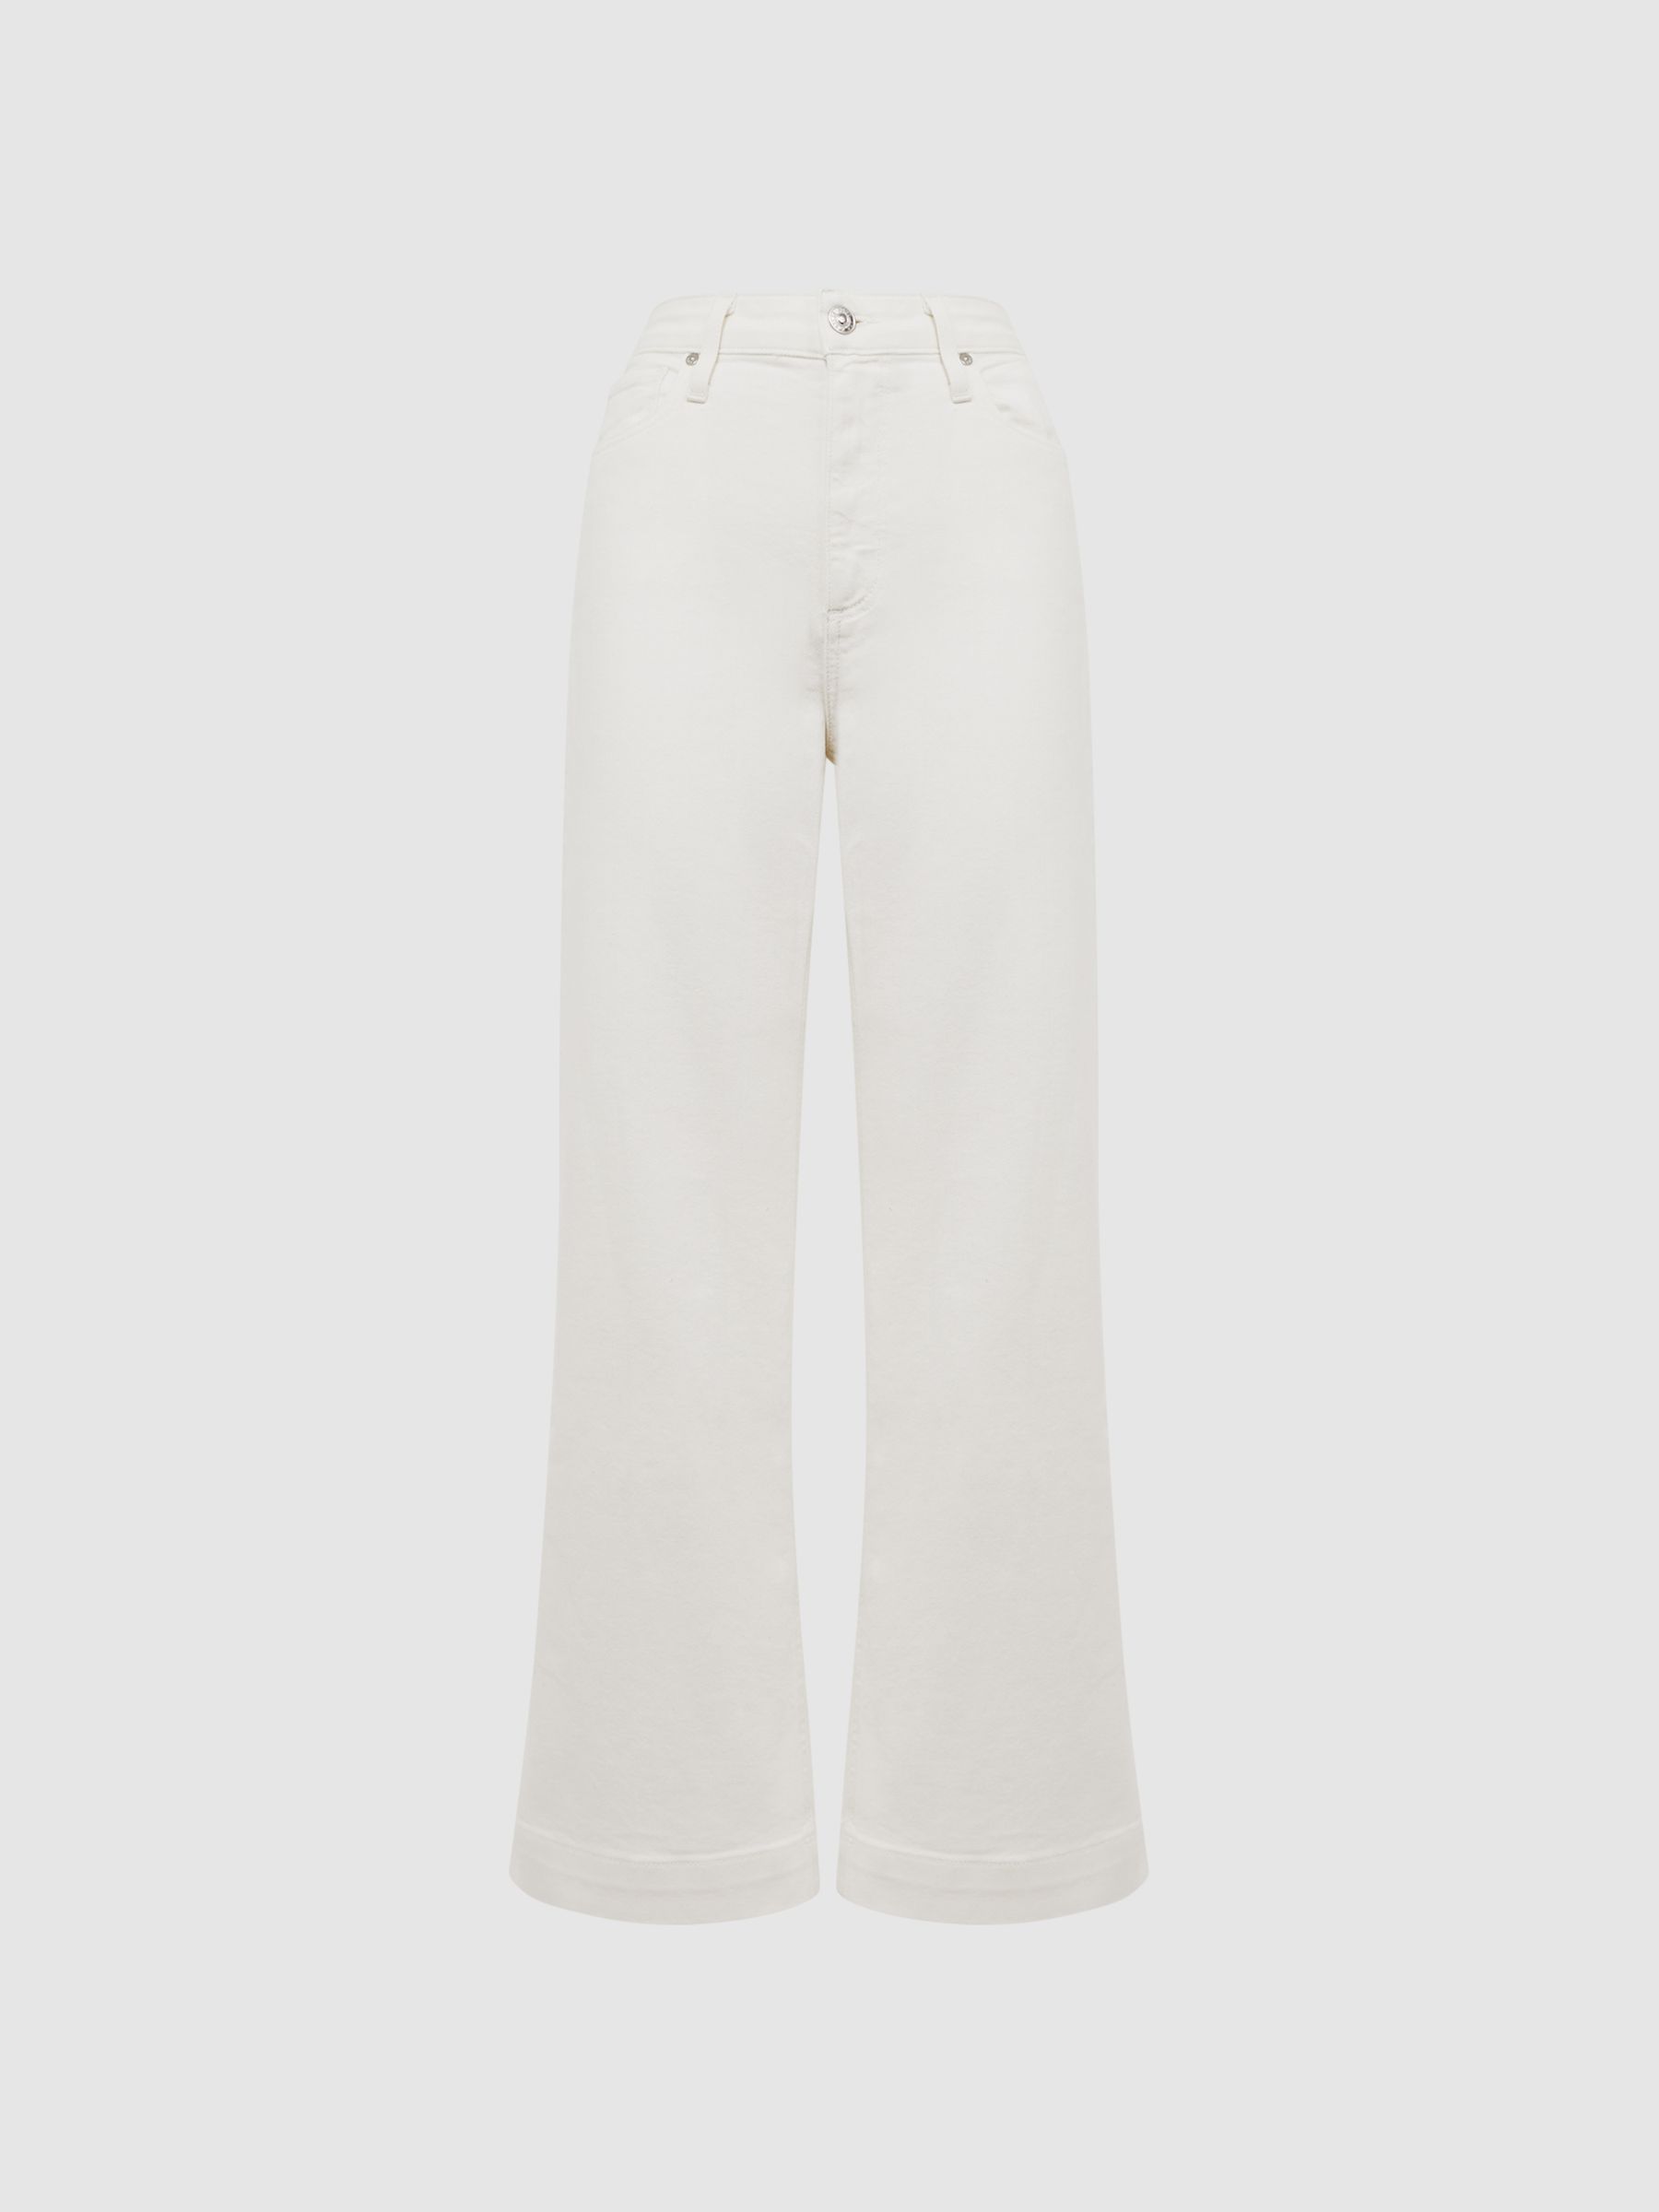 Reiss Anessa Paige High Rise Flared Jeans - REISS